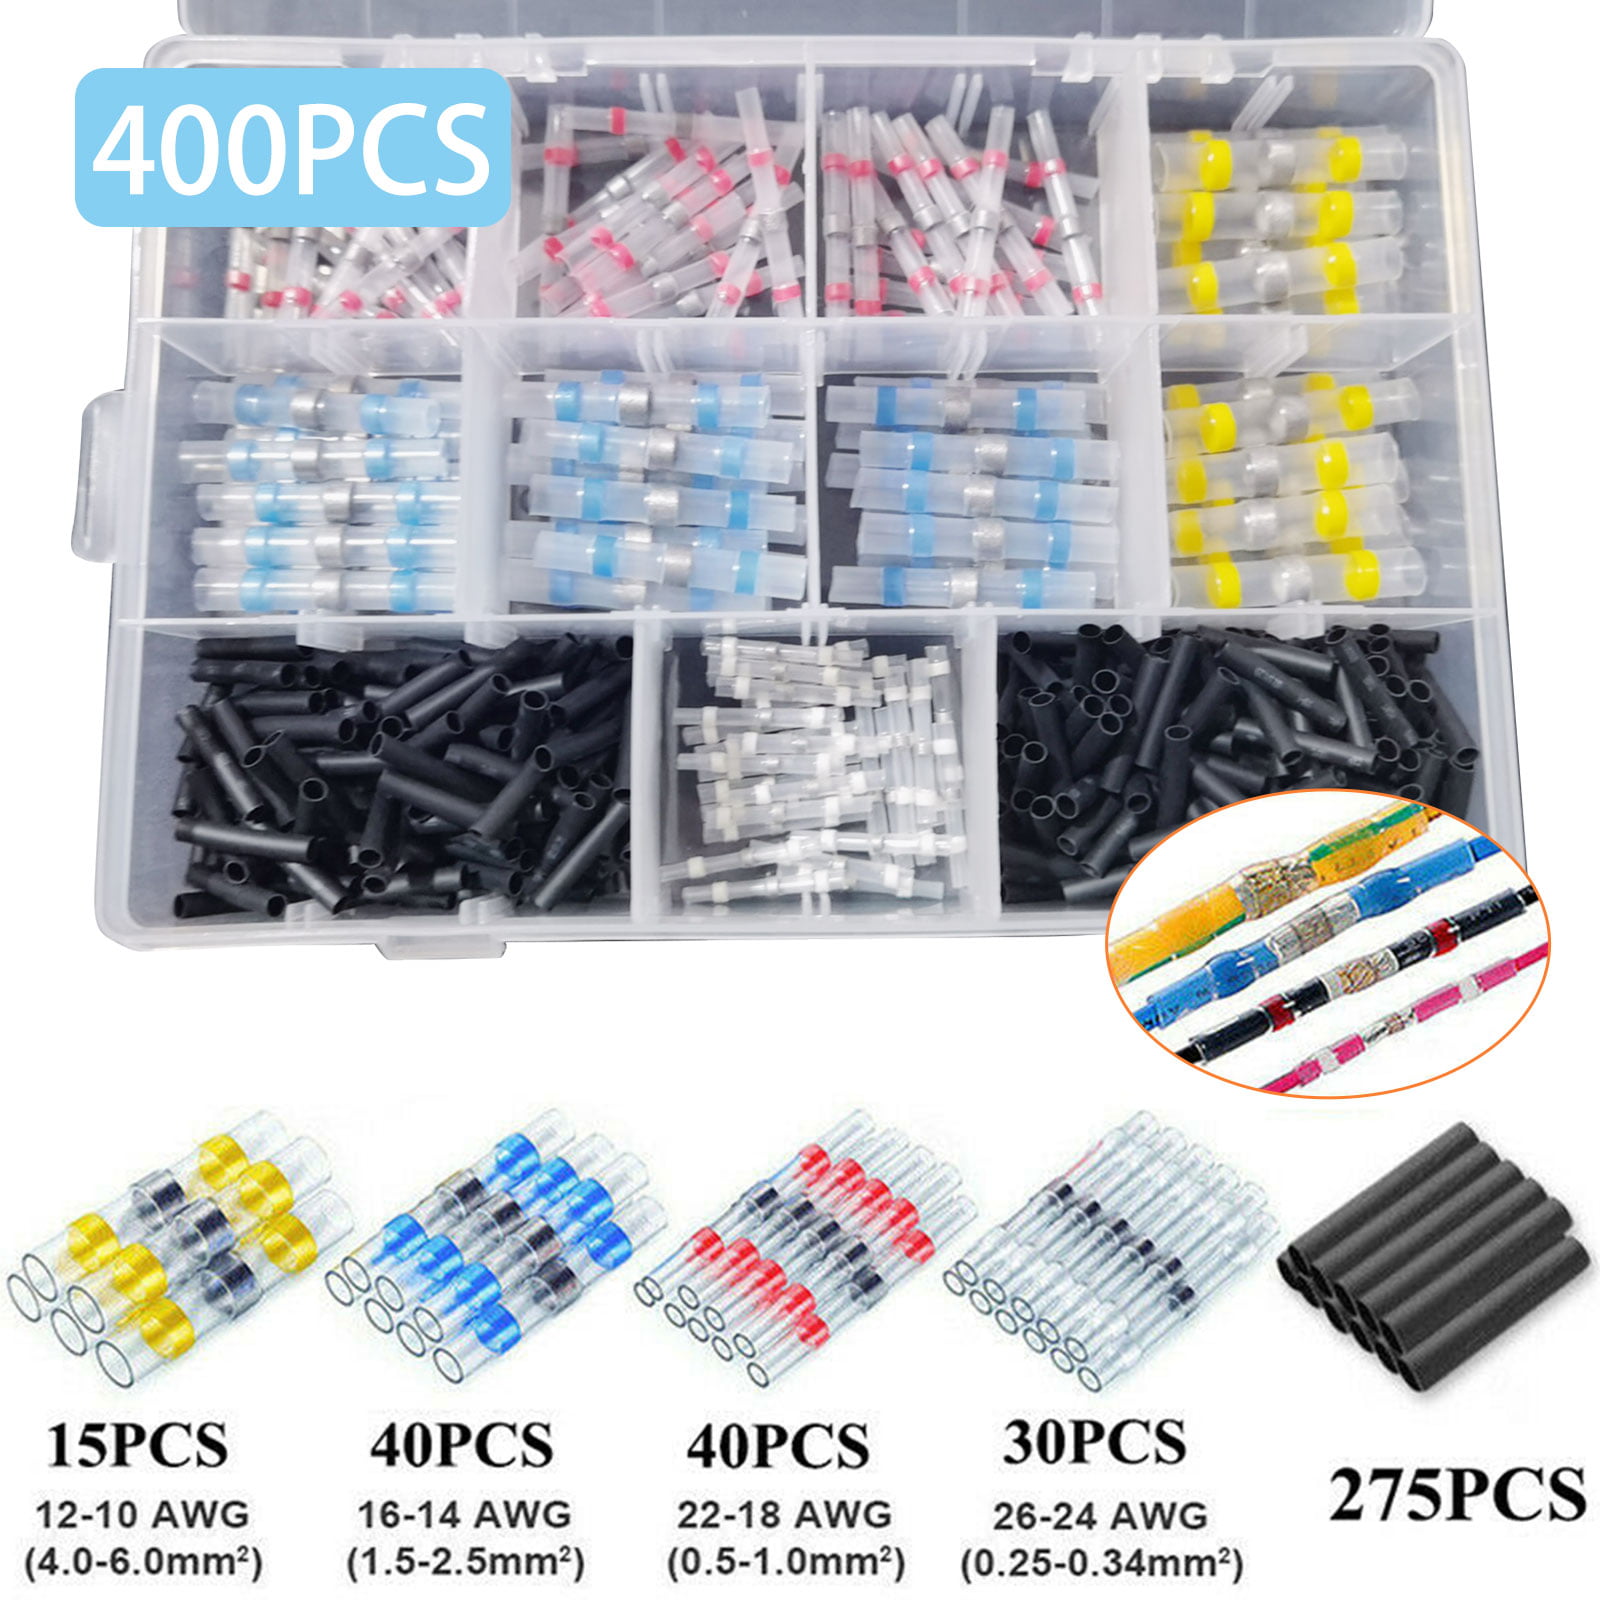 Heat Shrink & Solder Repair Kit for Insulating wires & Tools and Soldering #5445